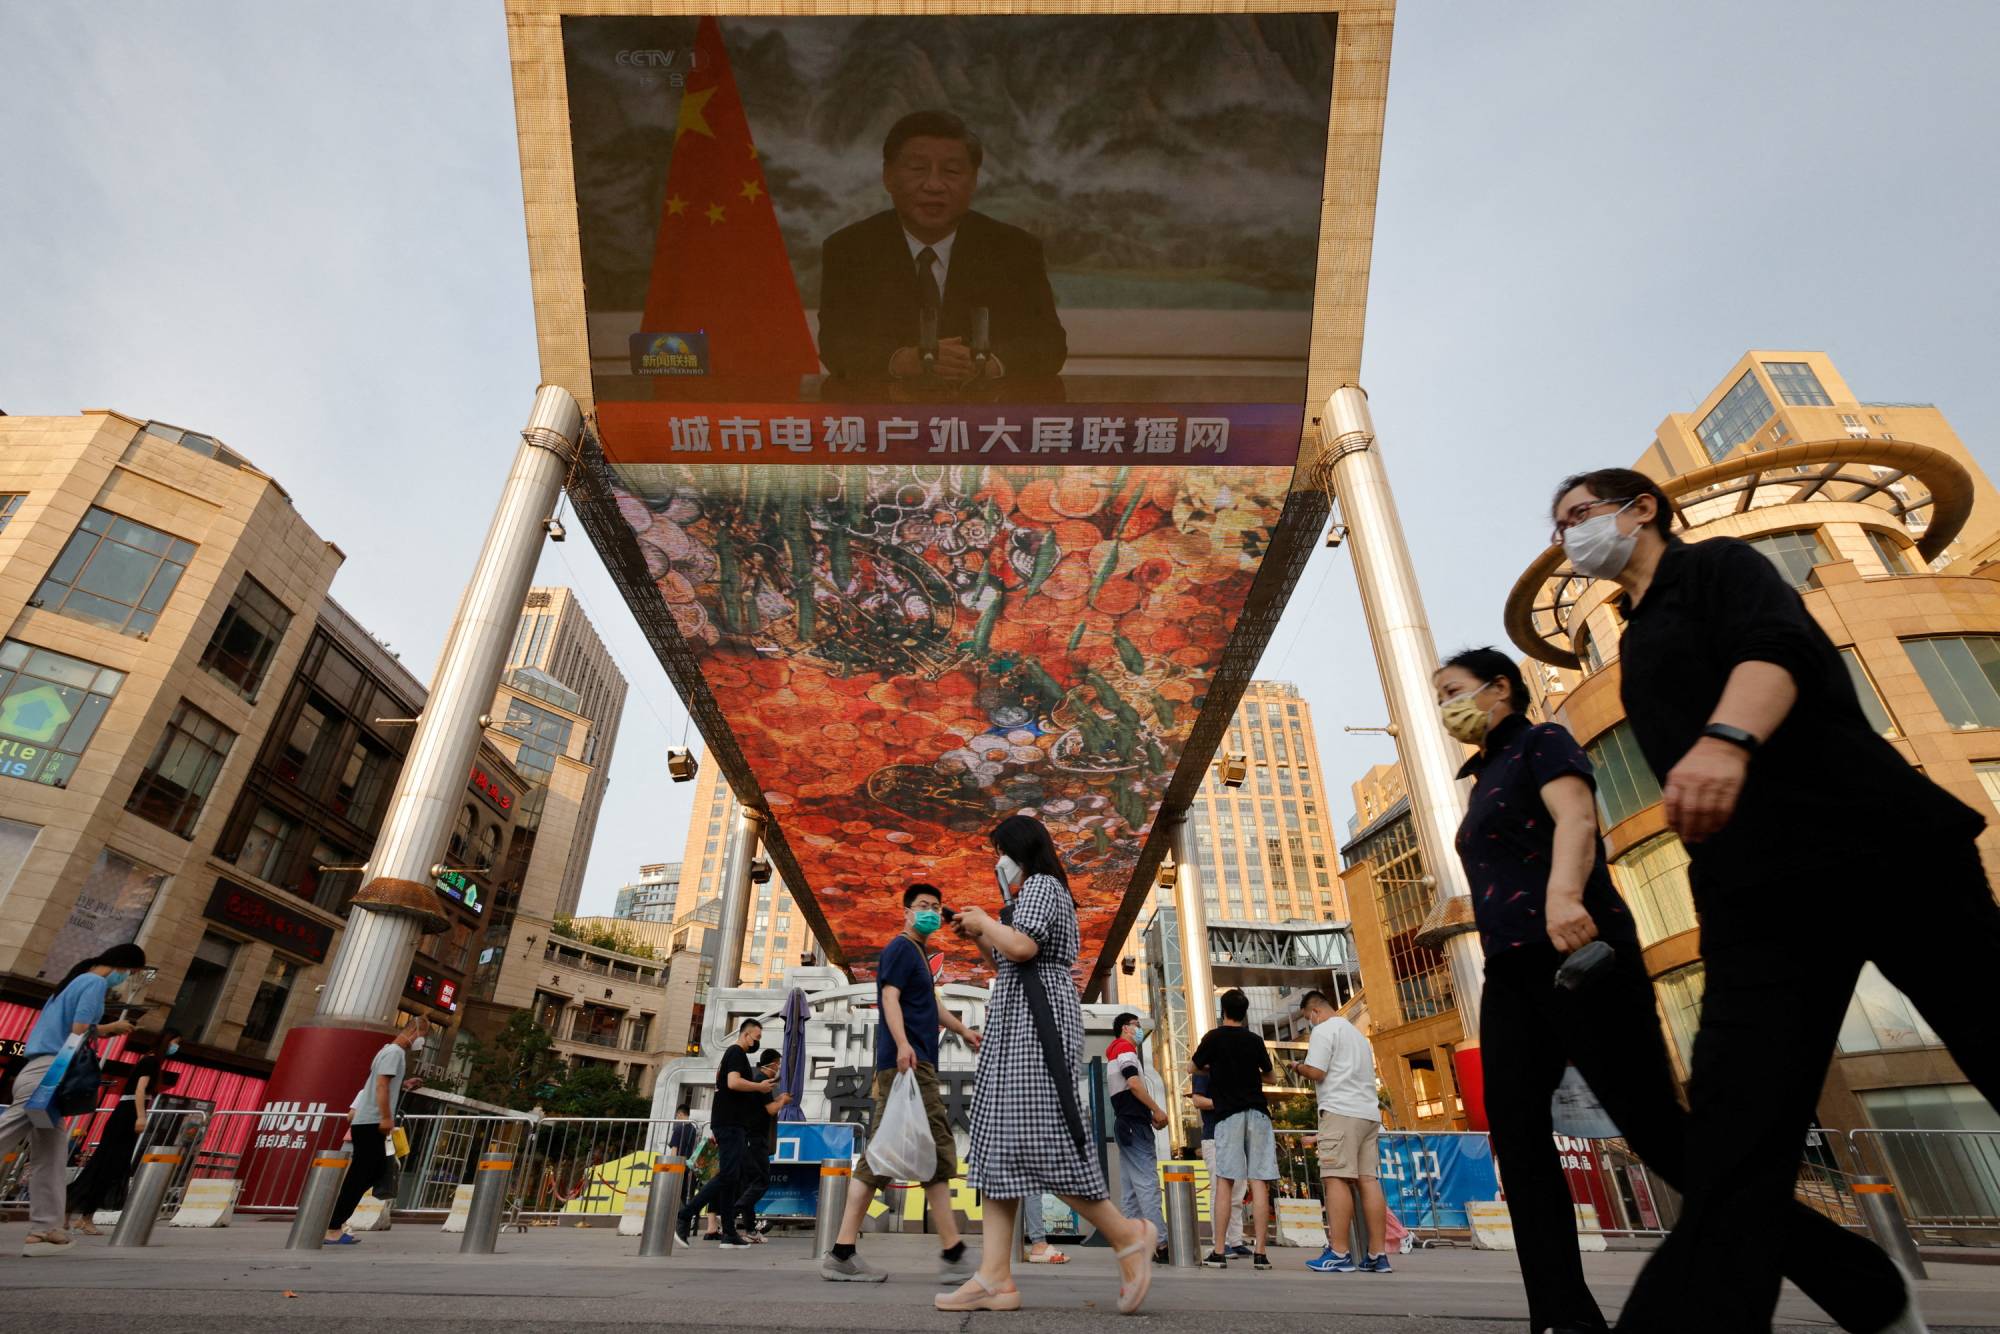 Screens above a shopping center in Beijing broadcast Chinese President Xi Jinping addressing the BRICS Business Forum via video link in June last year. | REUTERS